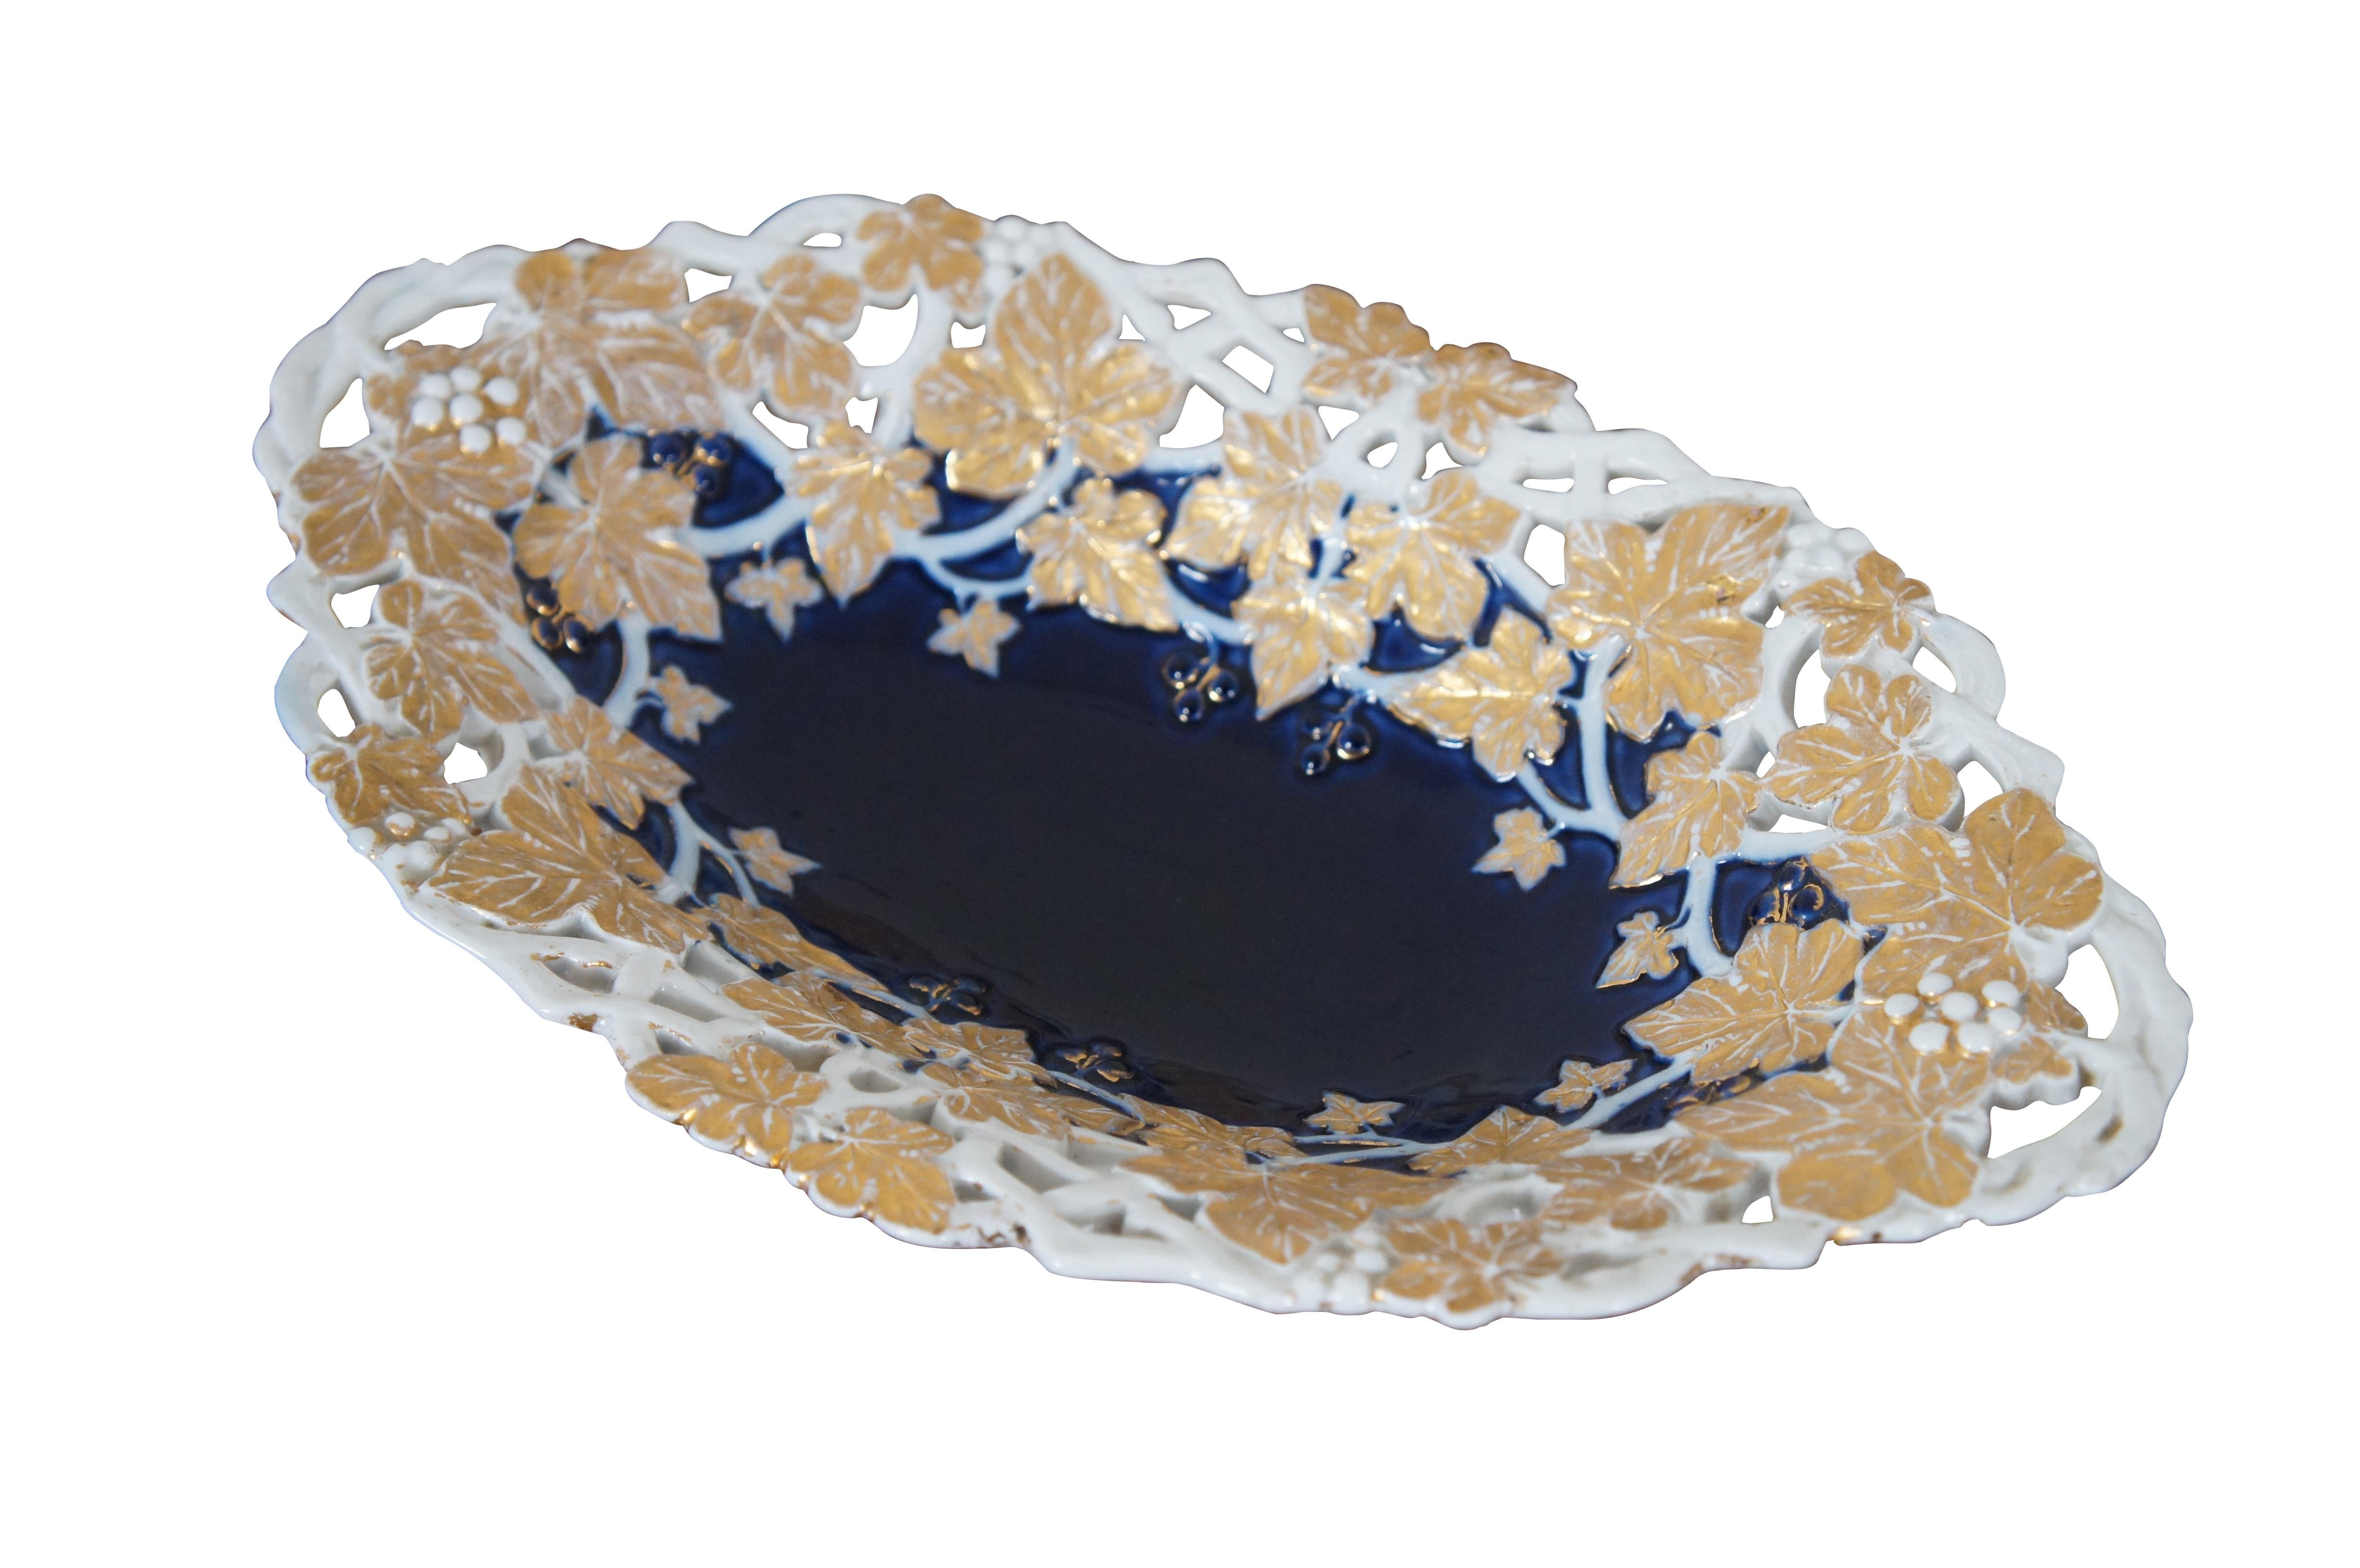 Antique German Dresden Meissen porcelain footed cabinet plate / centerpiece bowl / serving platter / compote featuring scalloped oval form with low relief reticulated design of gold gilt grapevines, grapes and leaves with cobalt blue center and